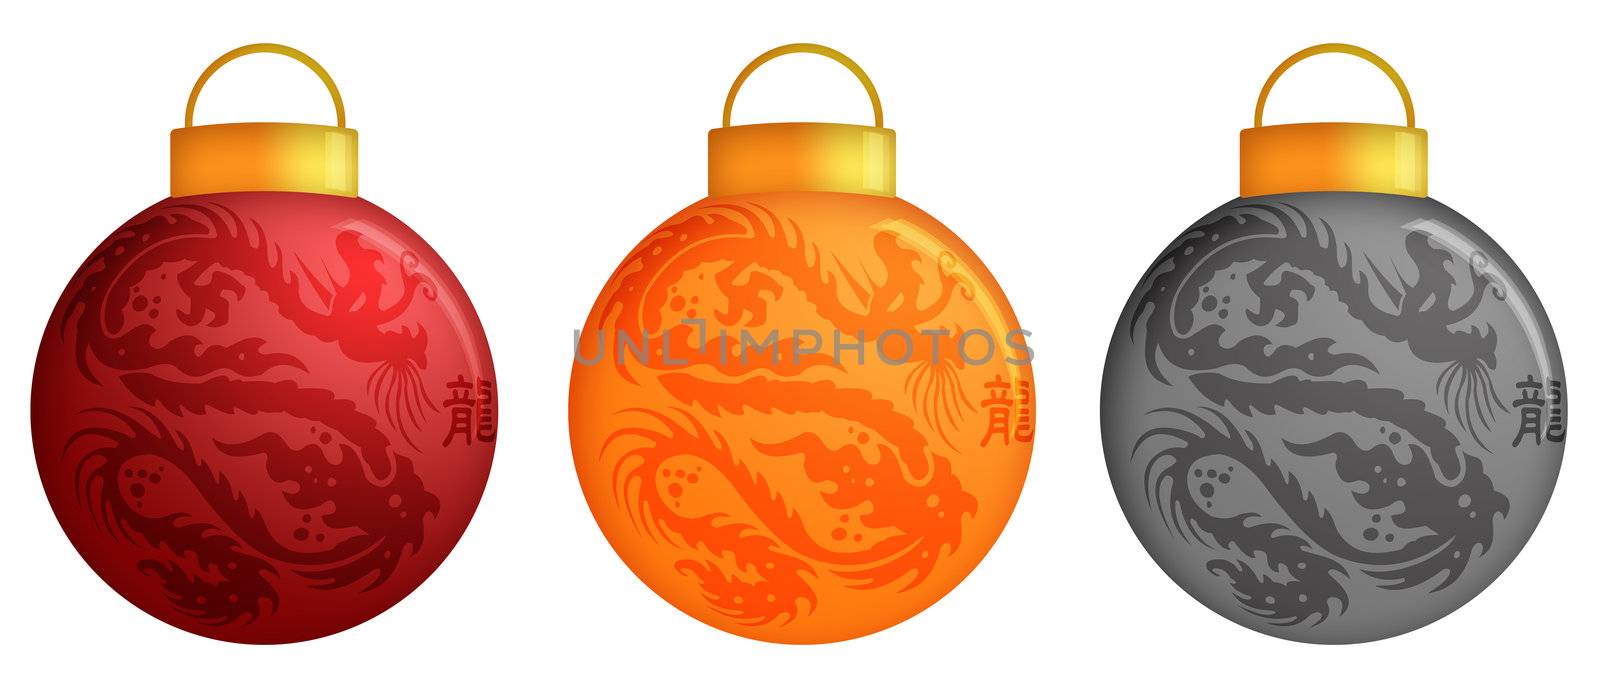 Chinese Dragon Christmas Ornaments Design and Calligraphy Illustration